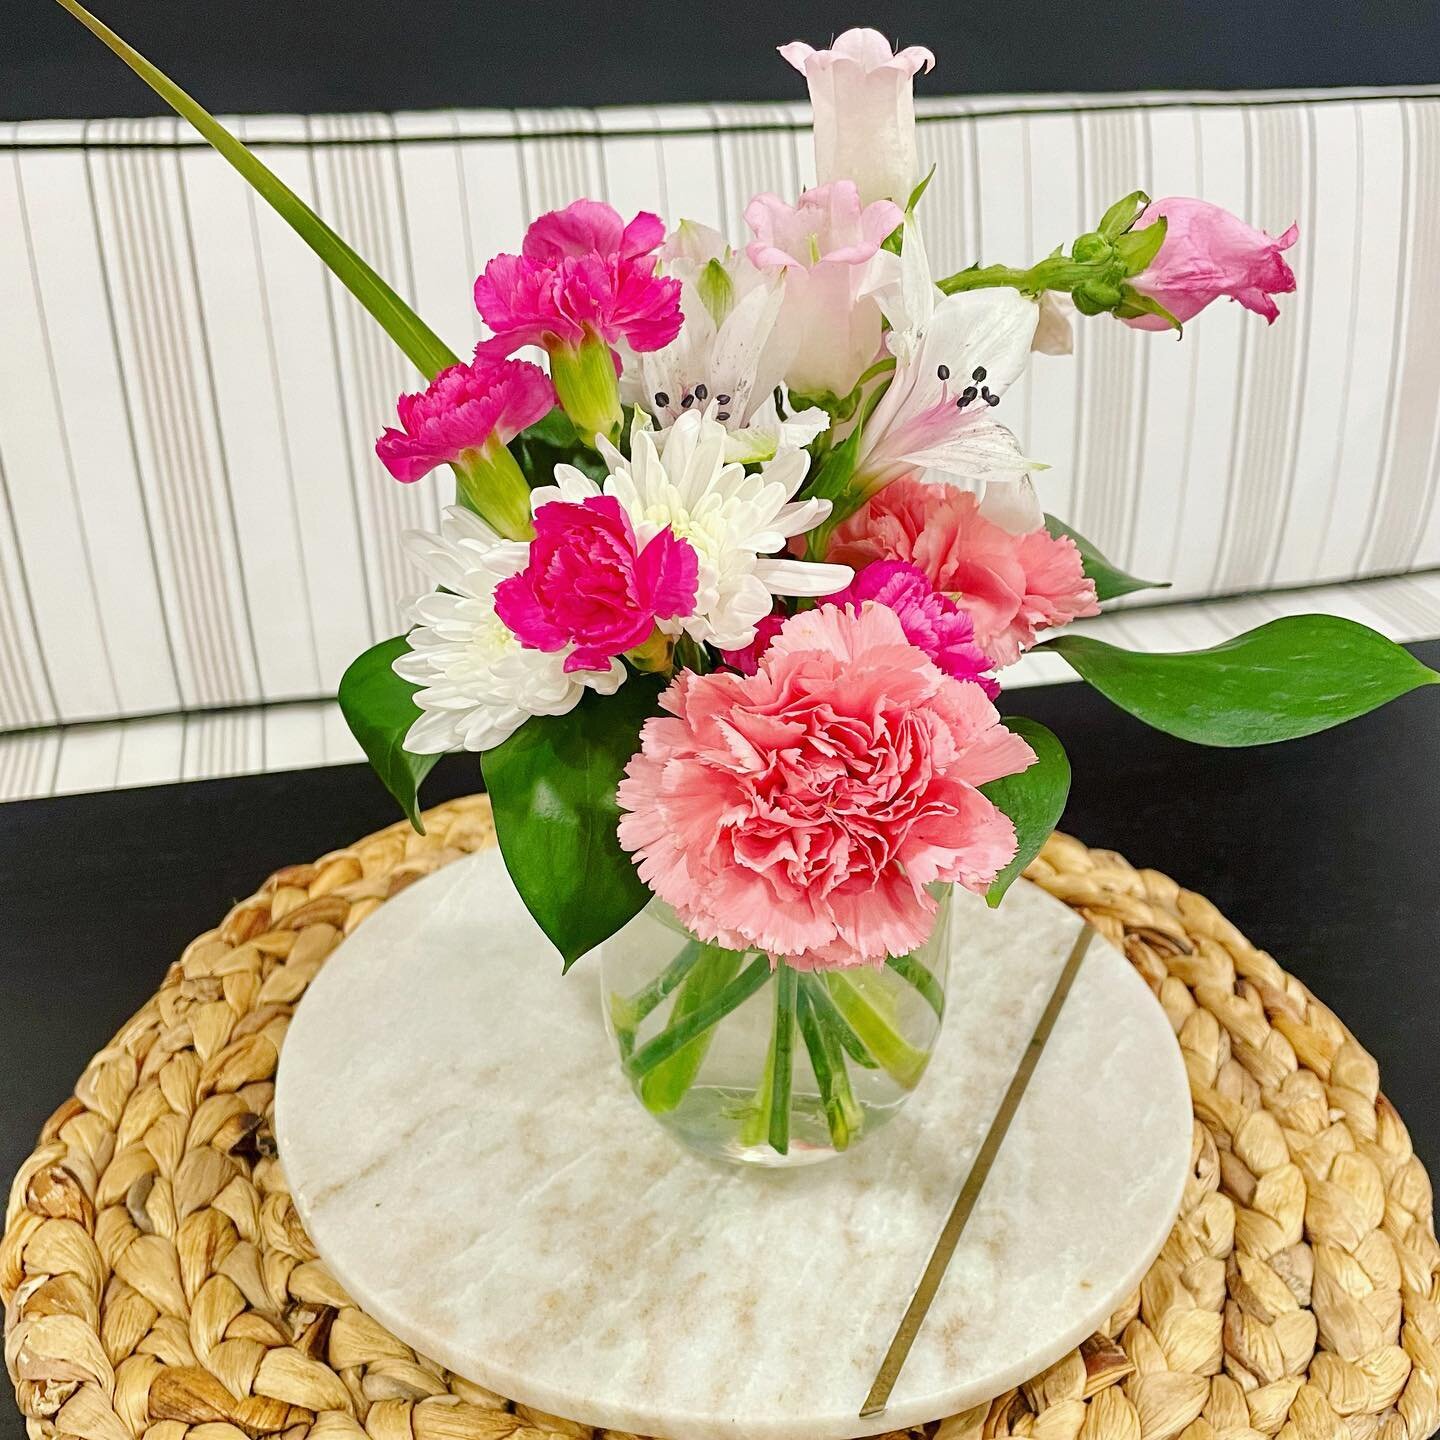 Well look at this little &ldquo;pretty &amp; pink&rdquo; collection of blooms - I love them! 💕

And to think I wouldn&rsquo;t be enjoying this cutie of an arrangement if I hadn&rsquo;t &ldquo;deconstructed and reimagined&rdquo; the larger arrangemen